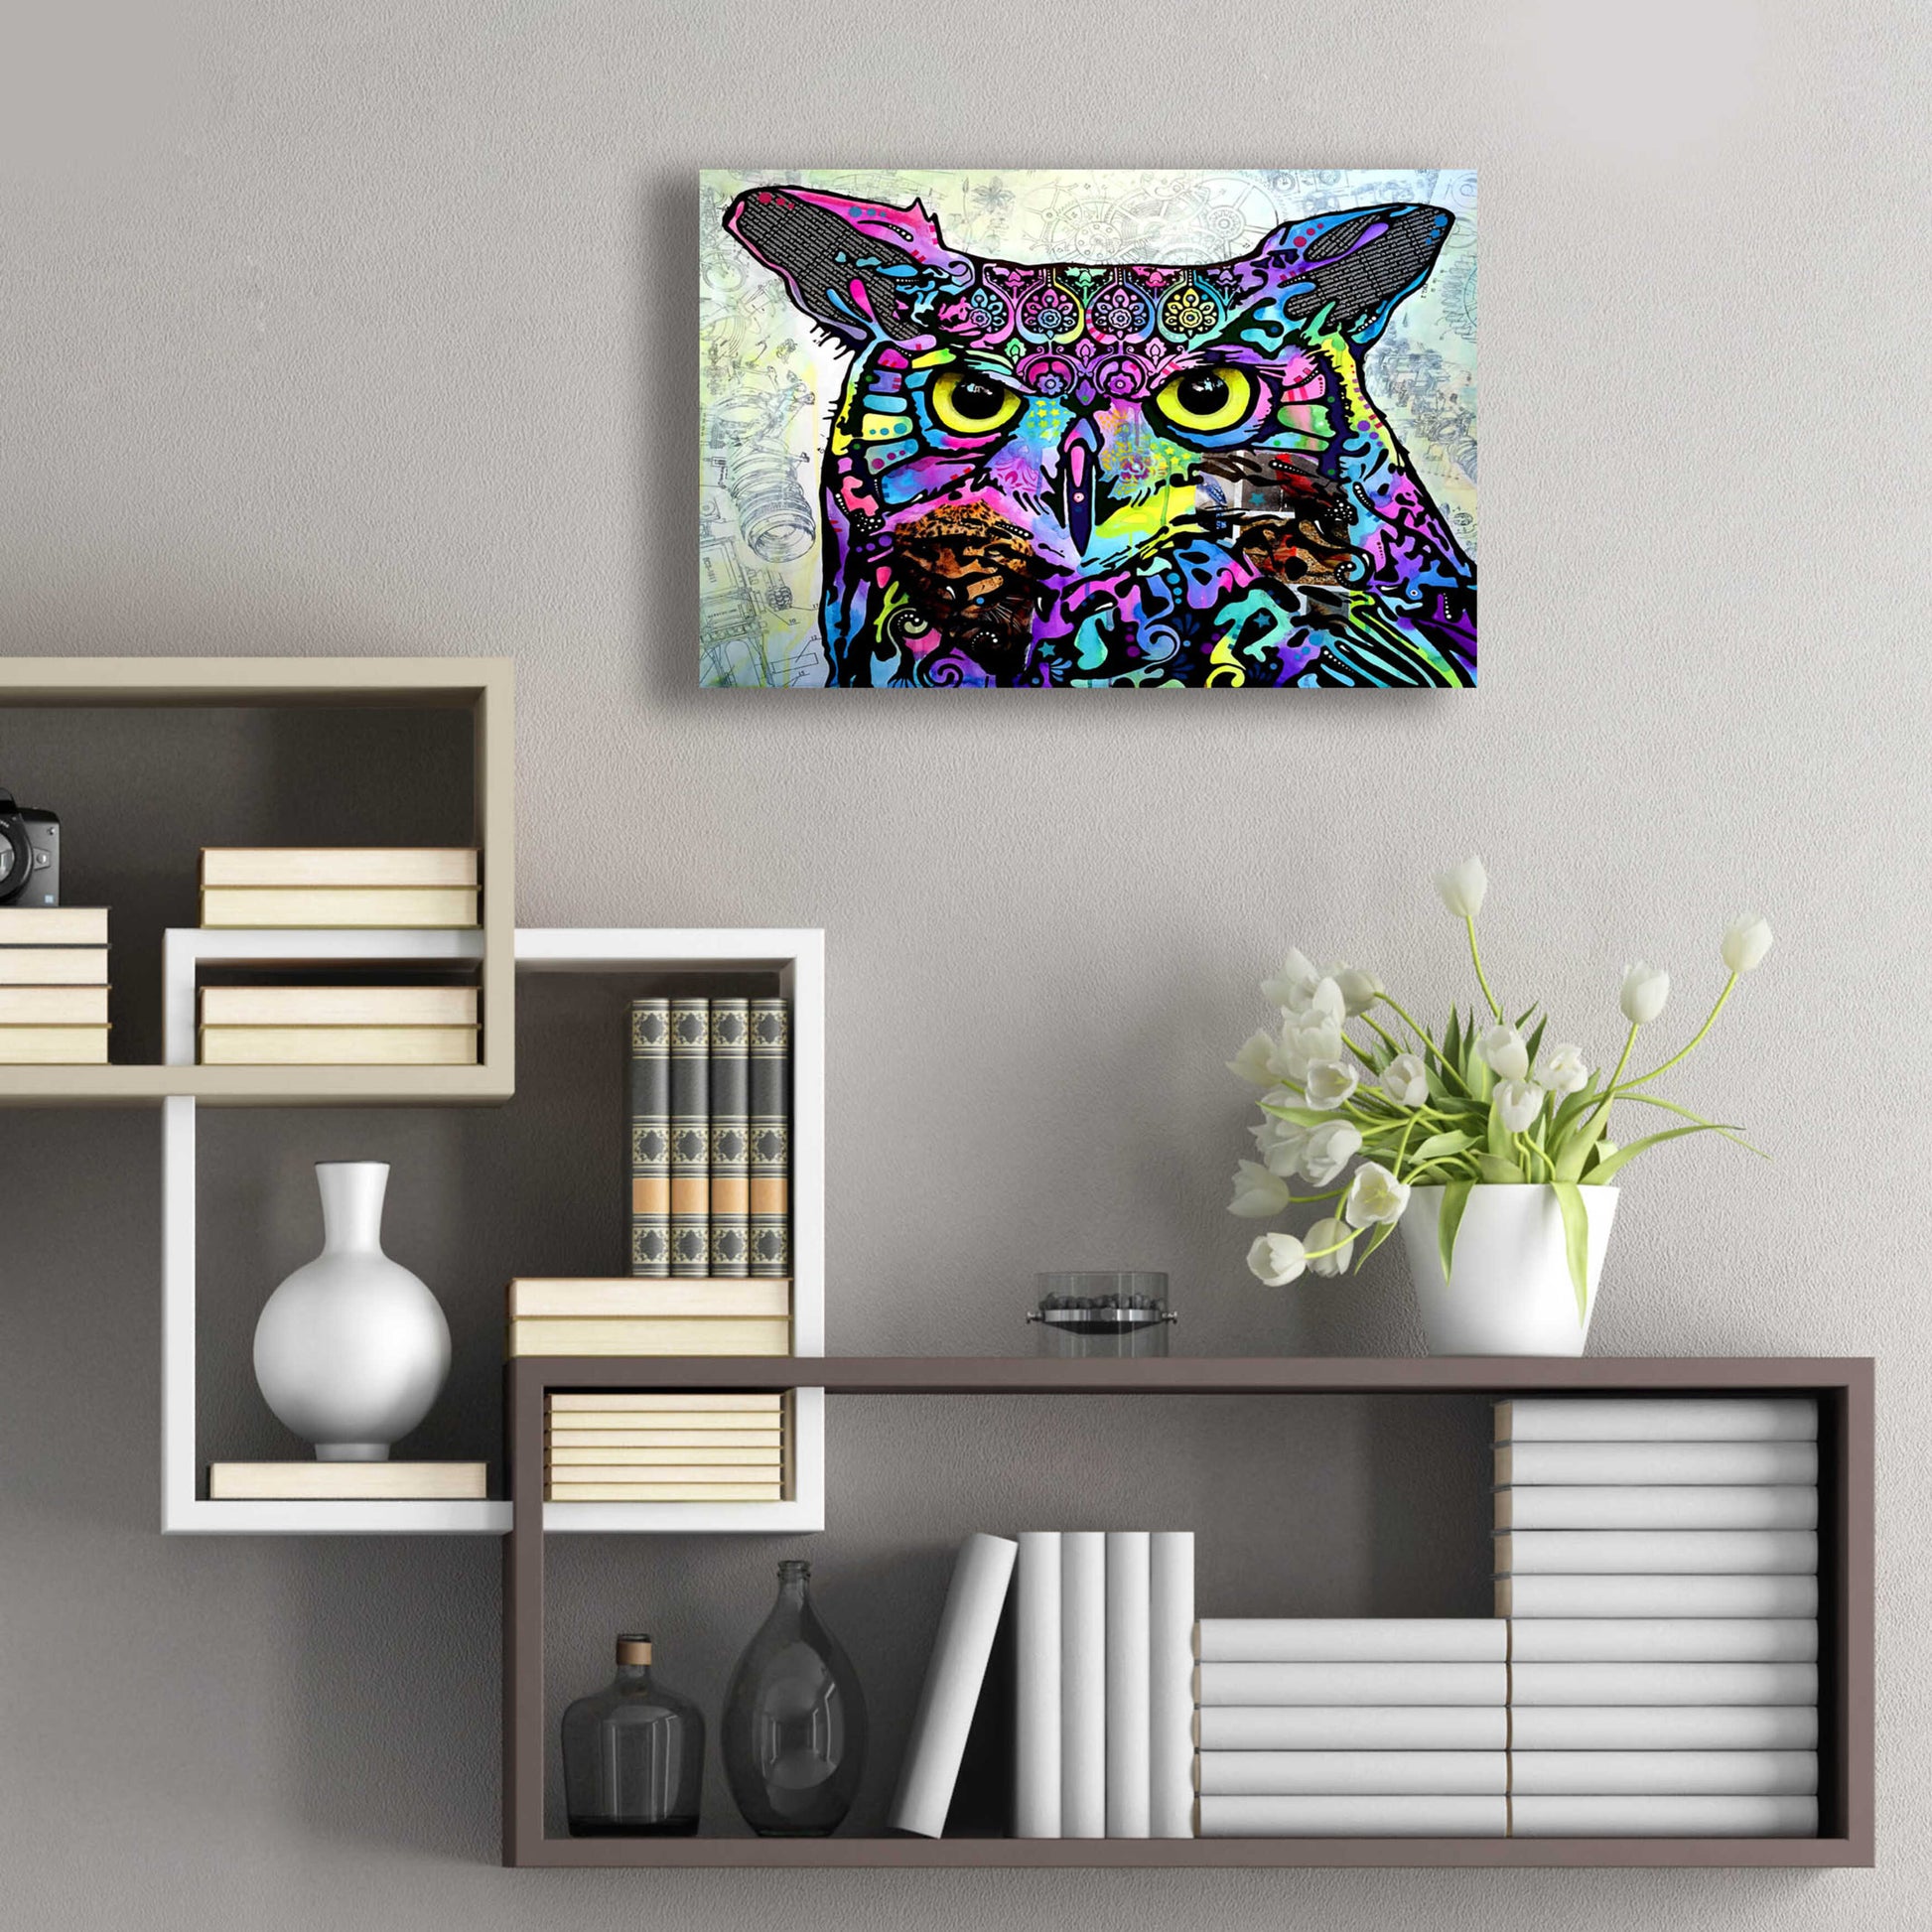 Epic Art 'The Owl' by Dean Russo, Acrylic Glass Wall Art,24x16